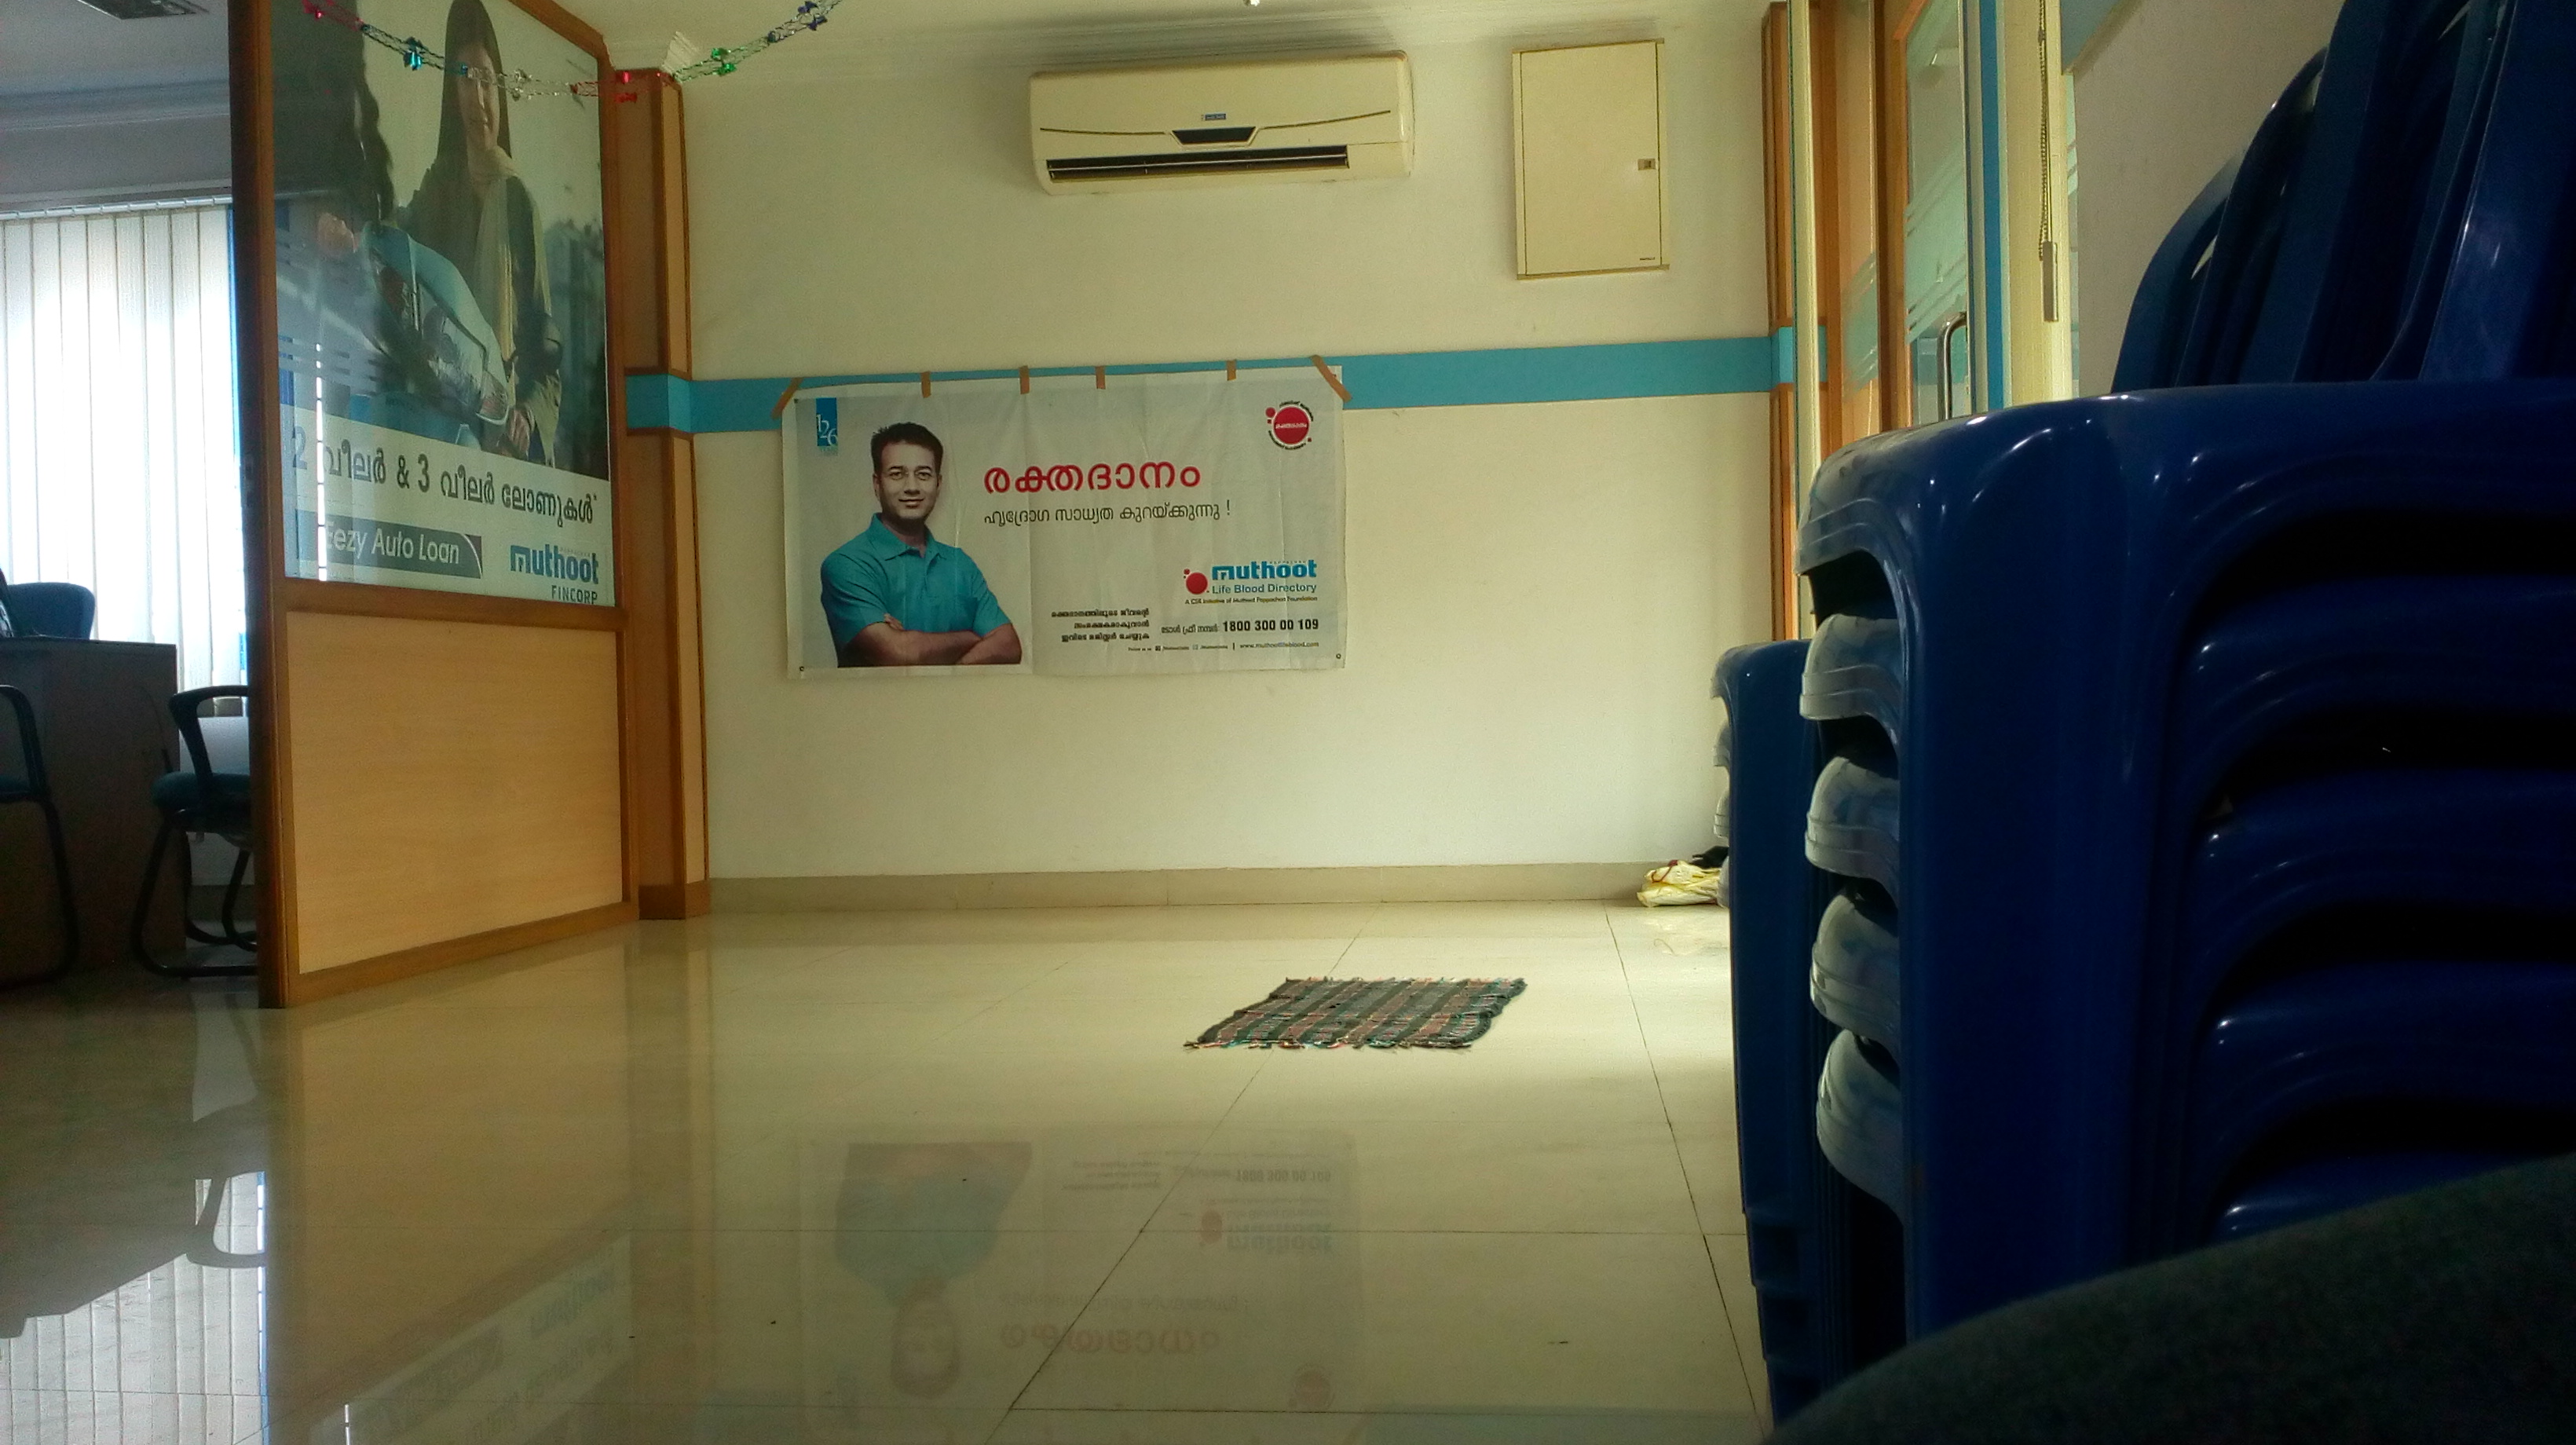 Photos and Videos of Muthoot Fincorp Gold Loan in Kanjikuzhy, Kottayam